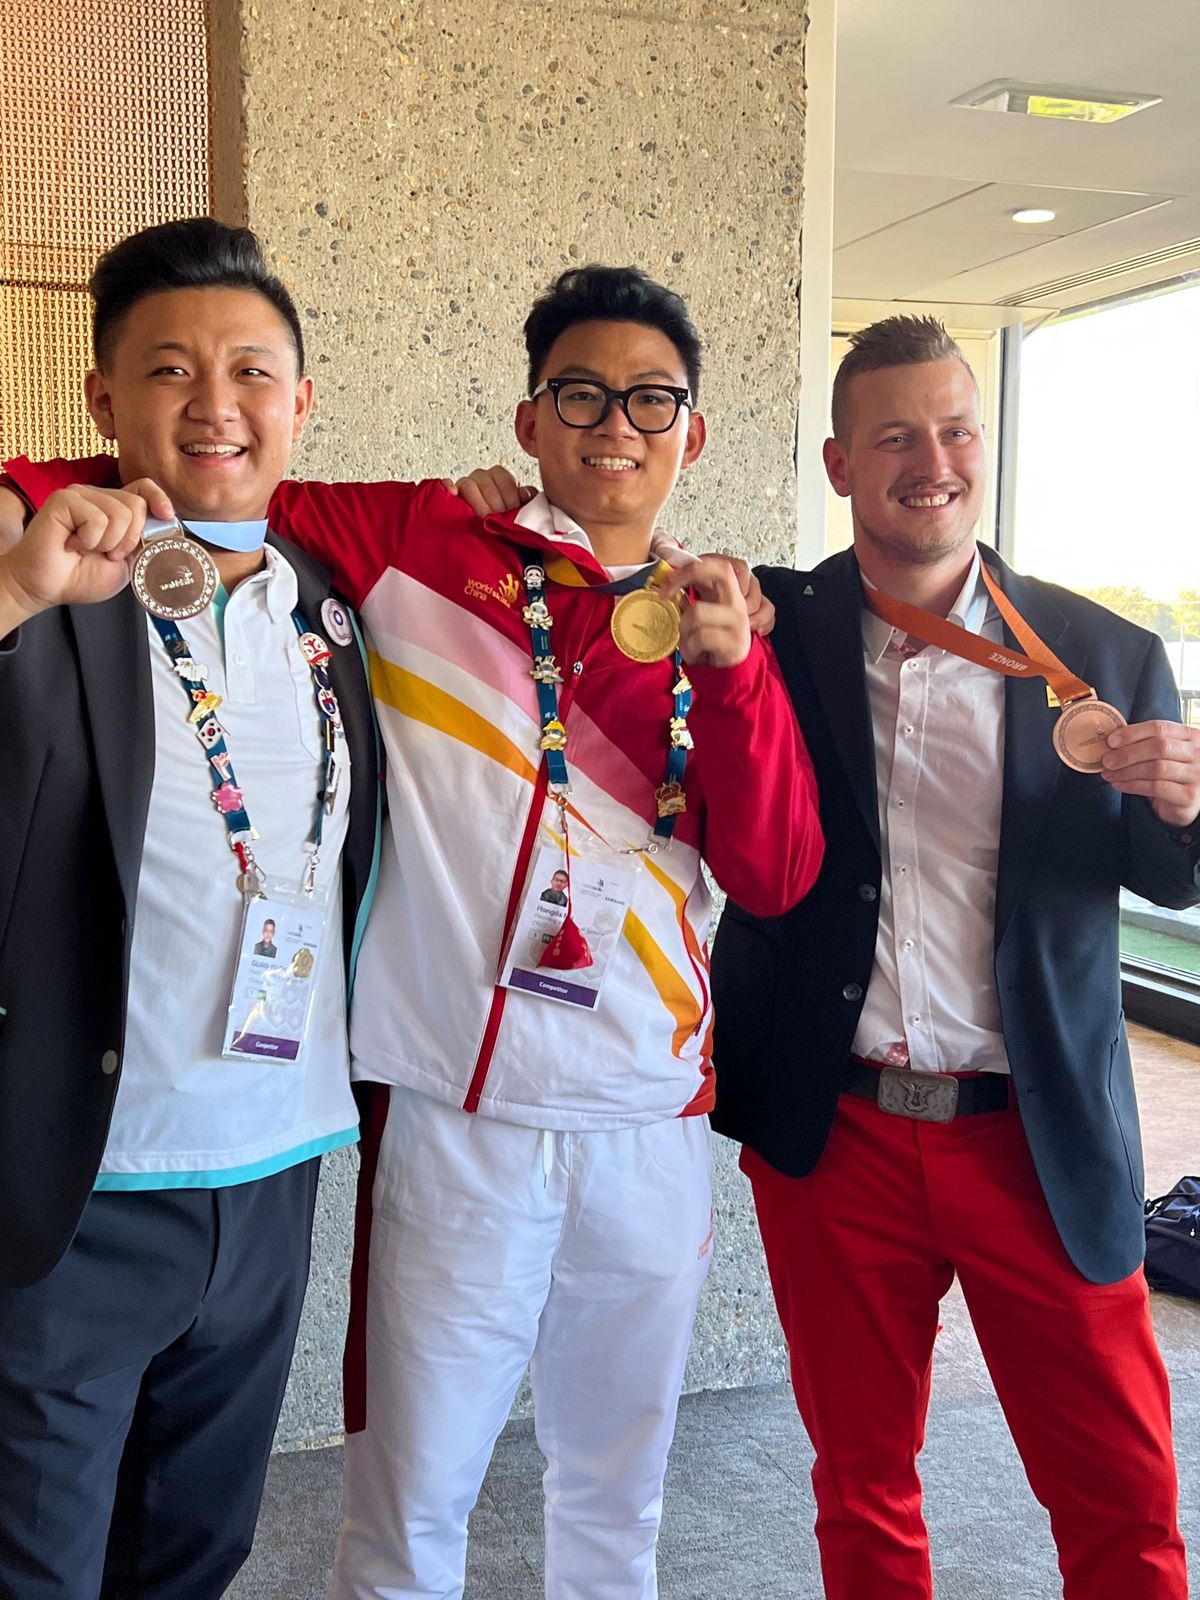 The top three (from left) in the Plasterer/Drywall Contractors category at the World Skills Special Edition in Bordeaux: Guan-Yu Chen (Taipei, Silver), Hongda Ma (China/Gold) and the bronze medalist Butler from Grund near Gstaad, Adrian.